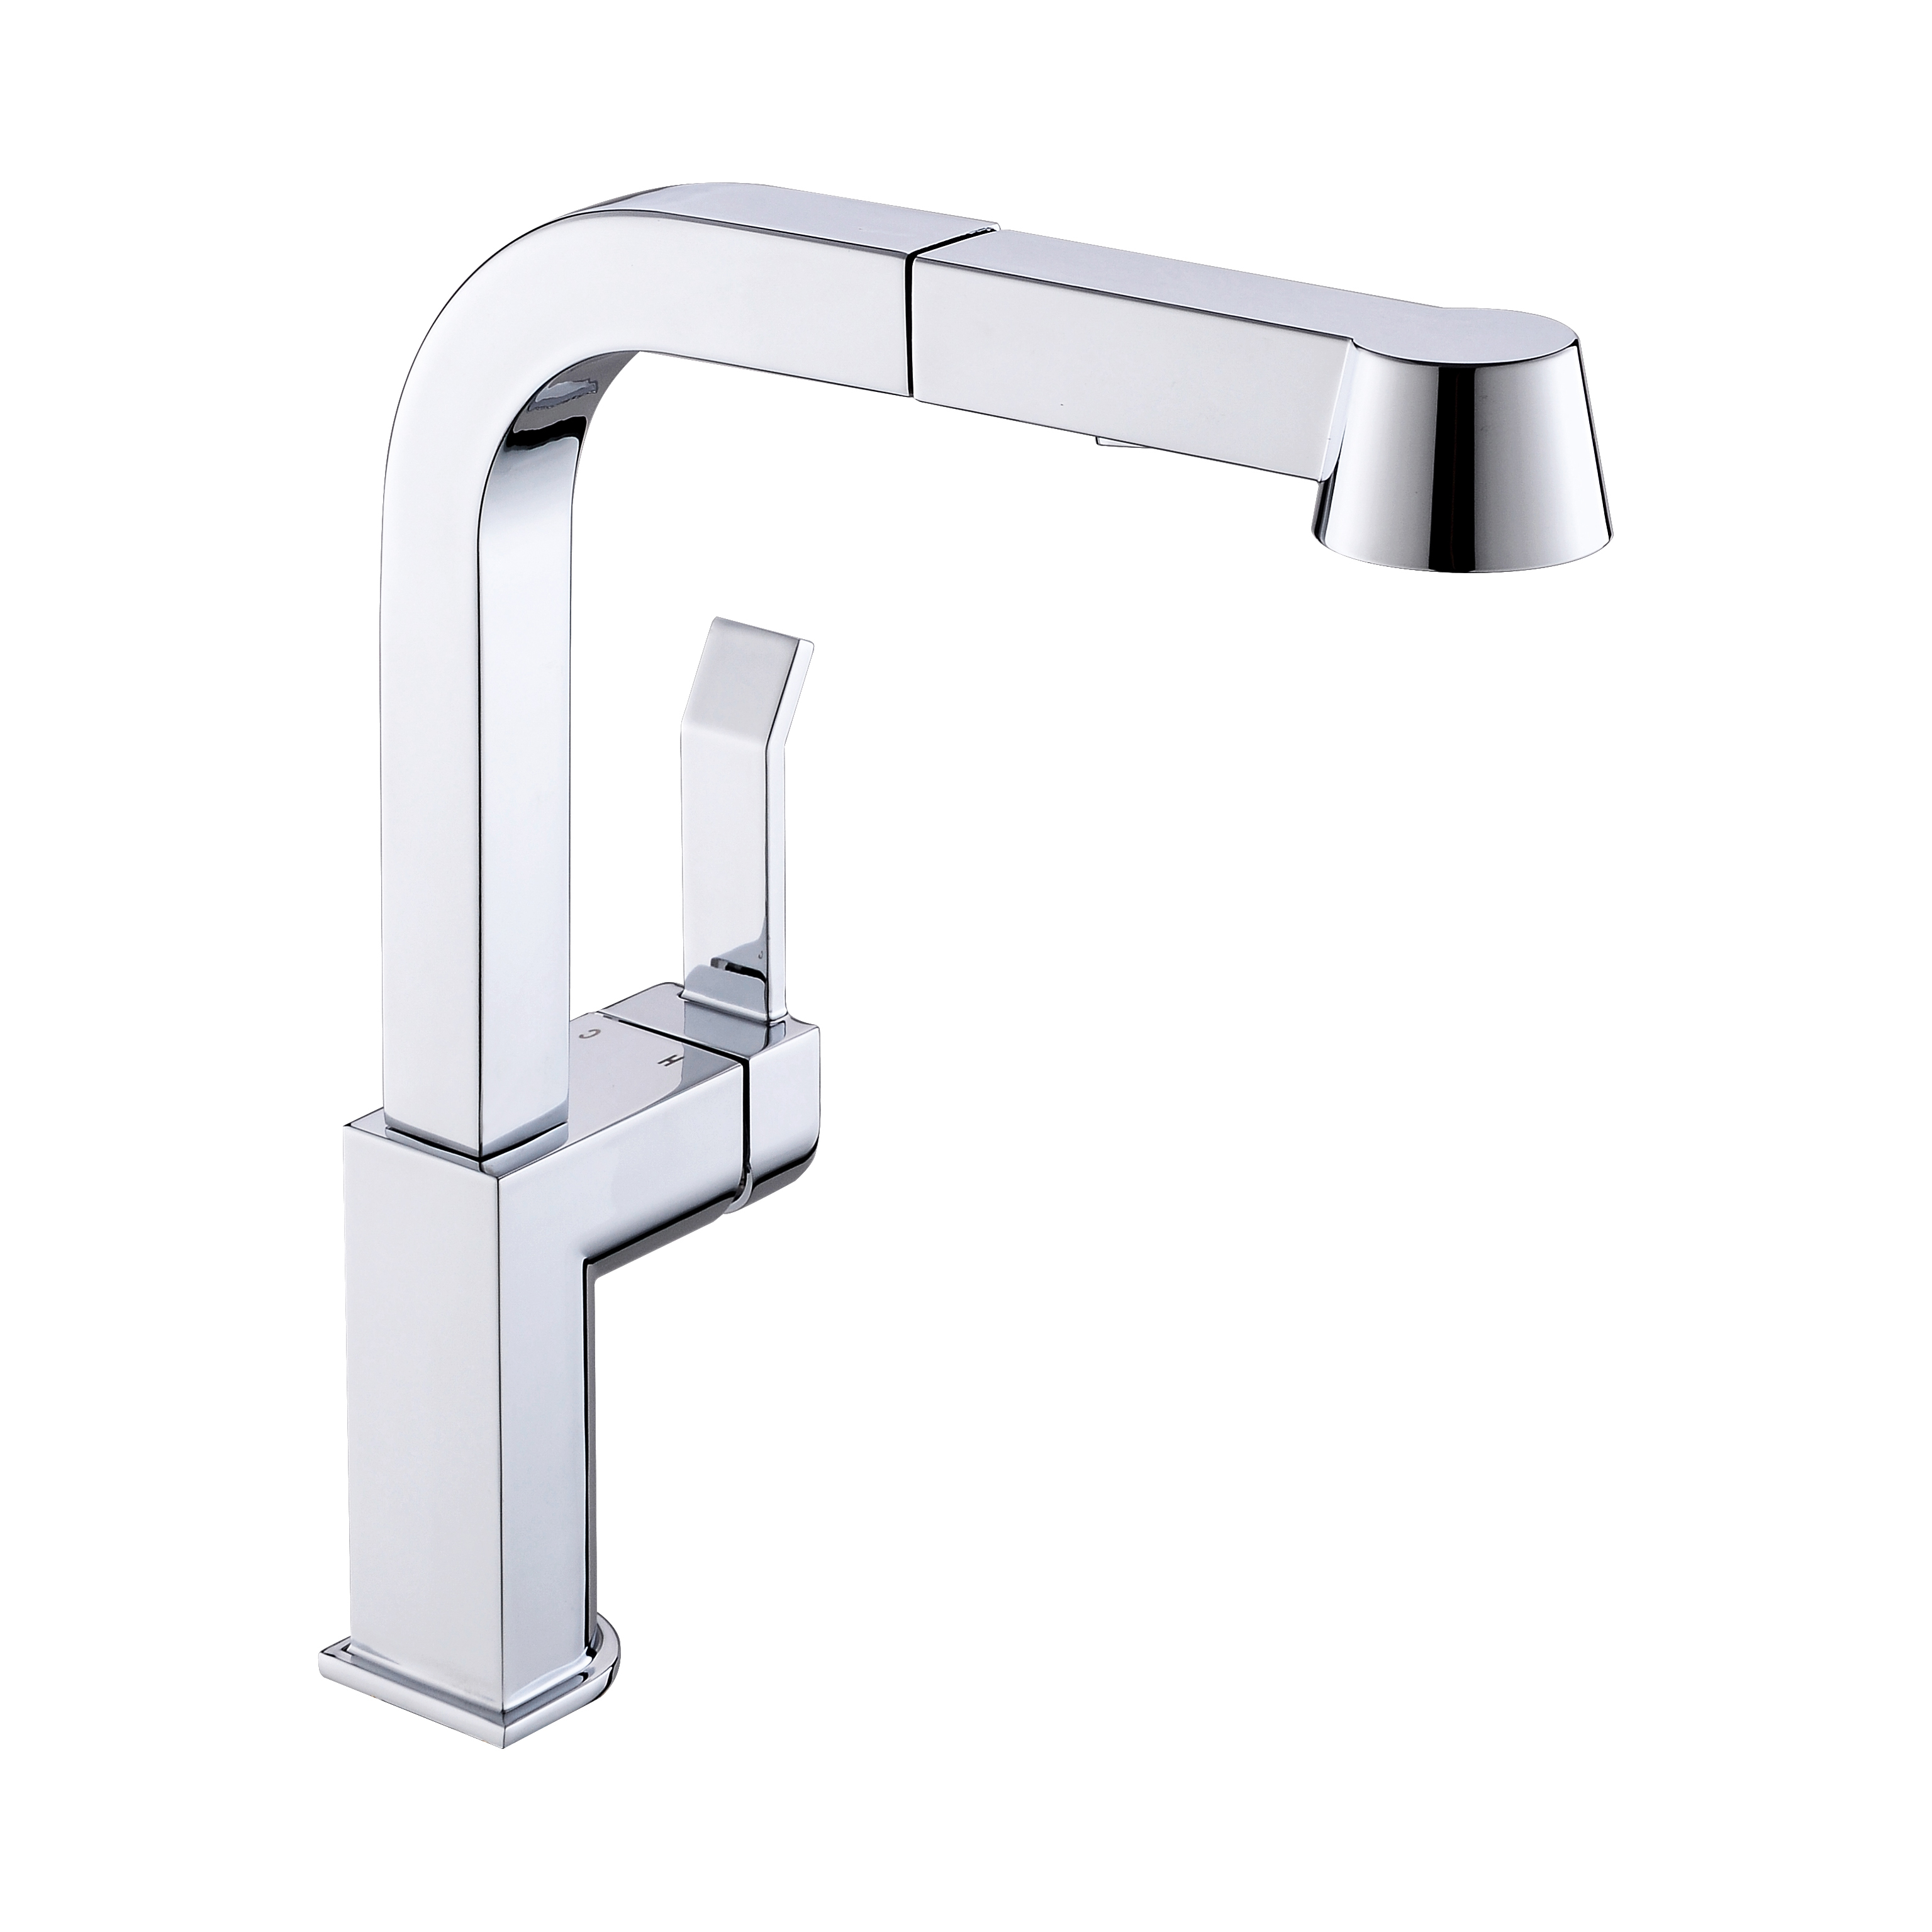 Chrome Kitchen Faucet Modern Kitchen Faucets in Square Shape